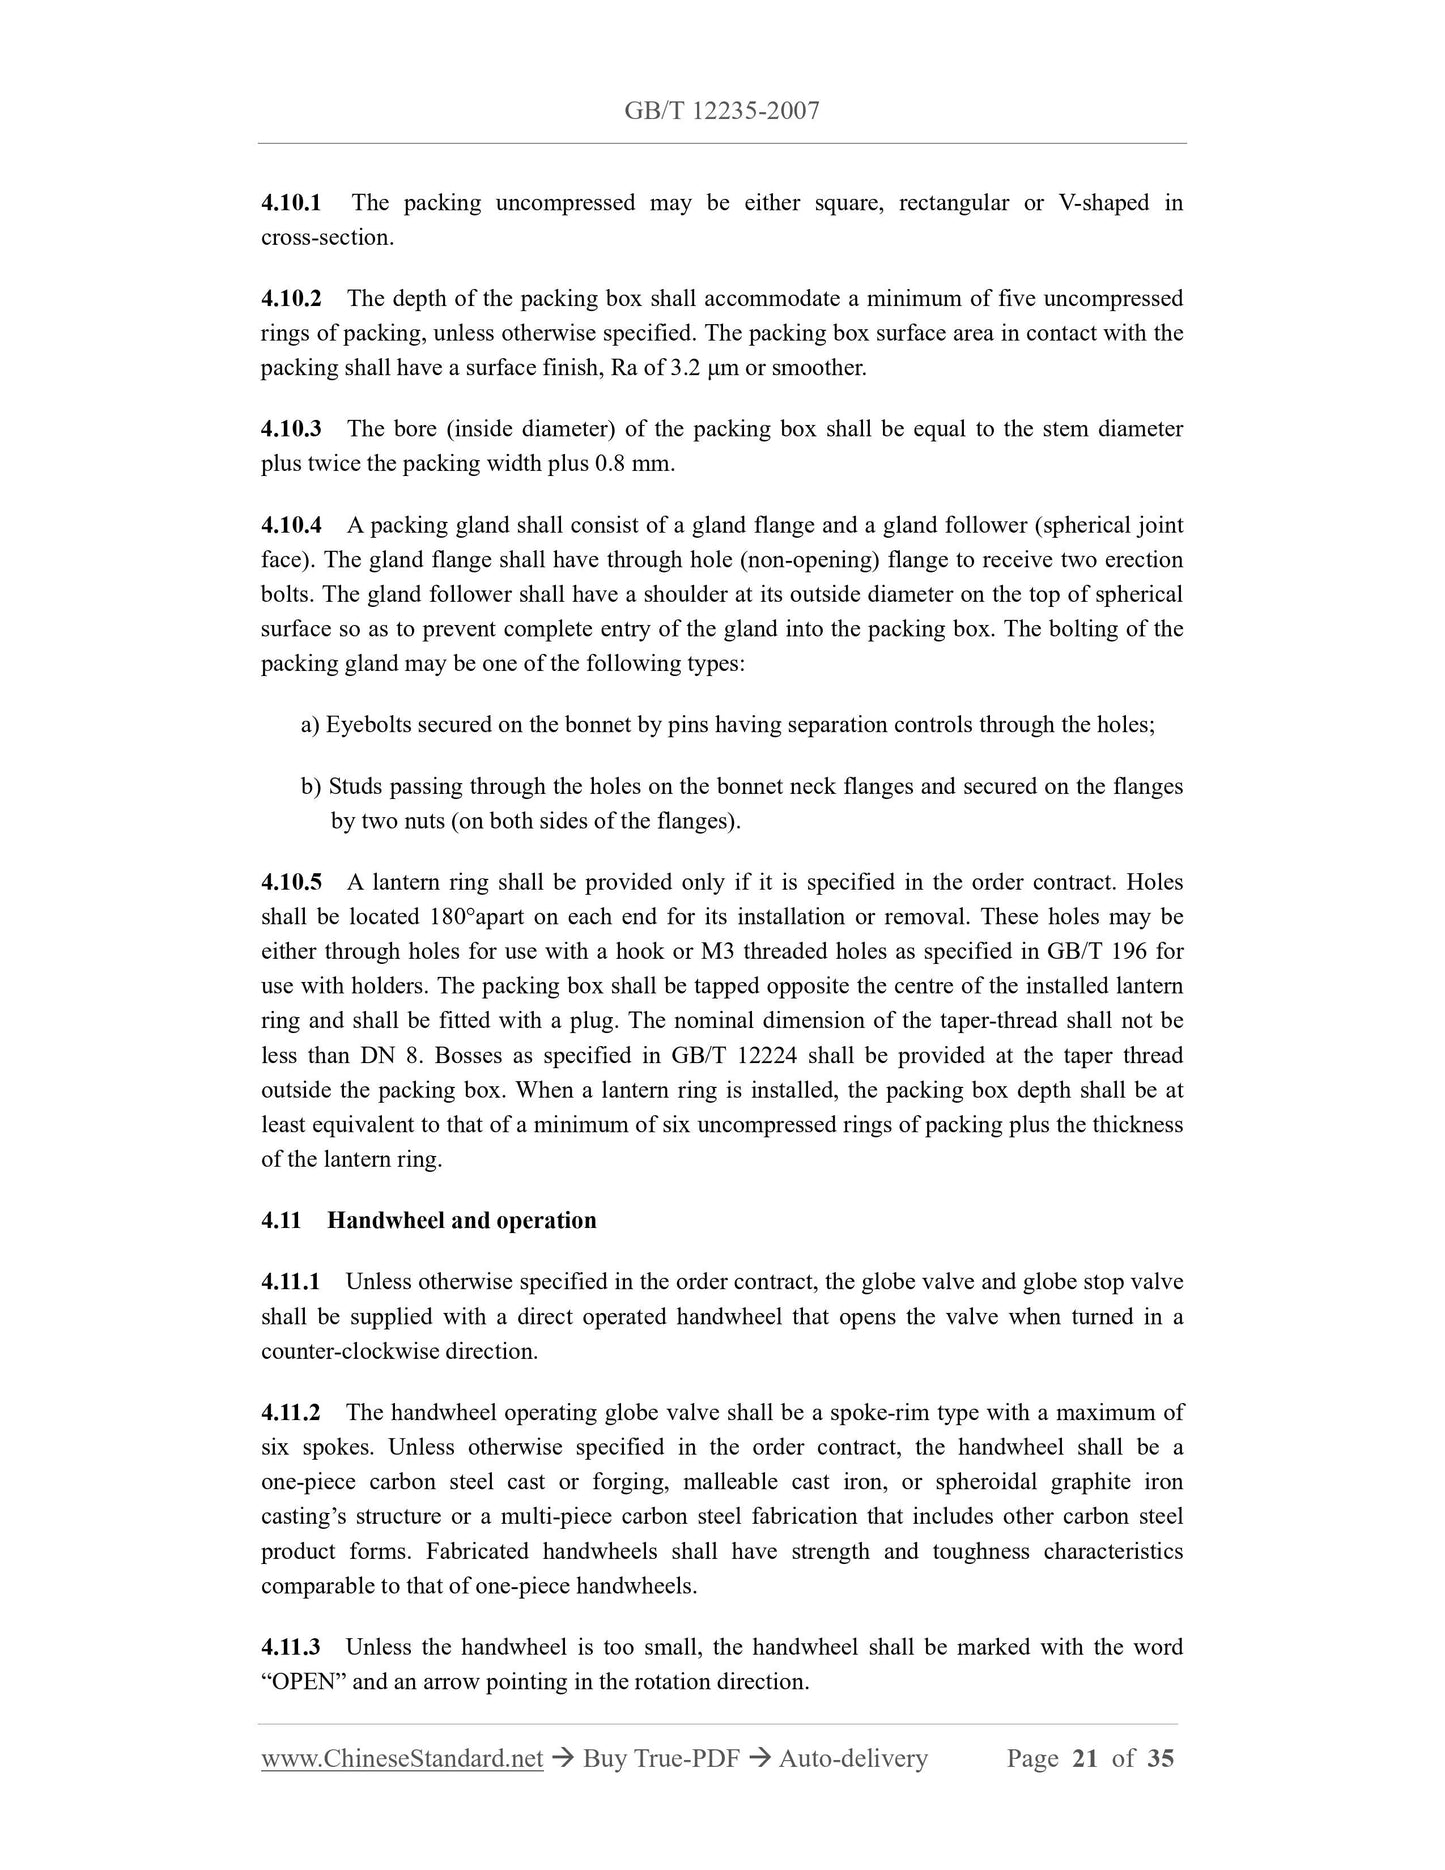 GB/T 12235-2007 Page 5